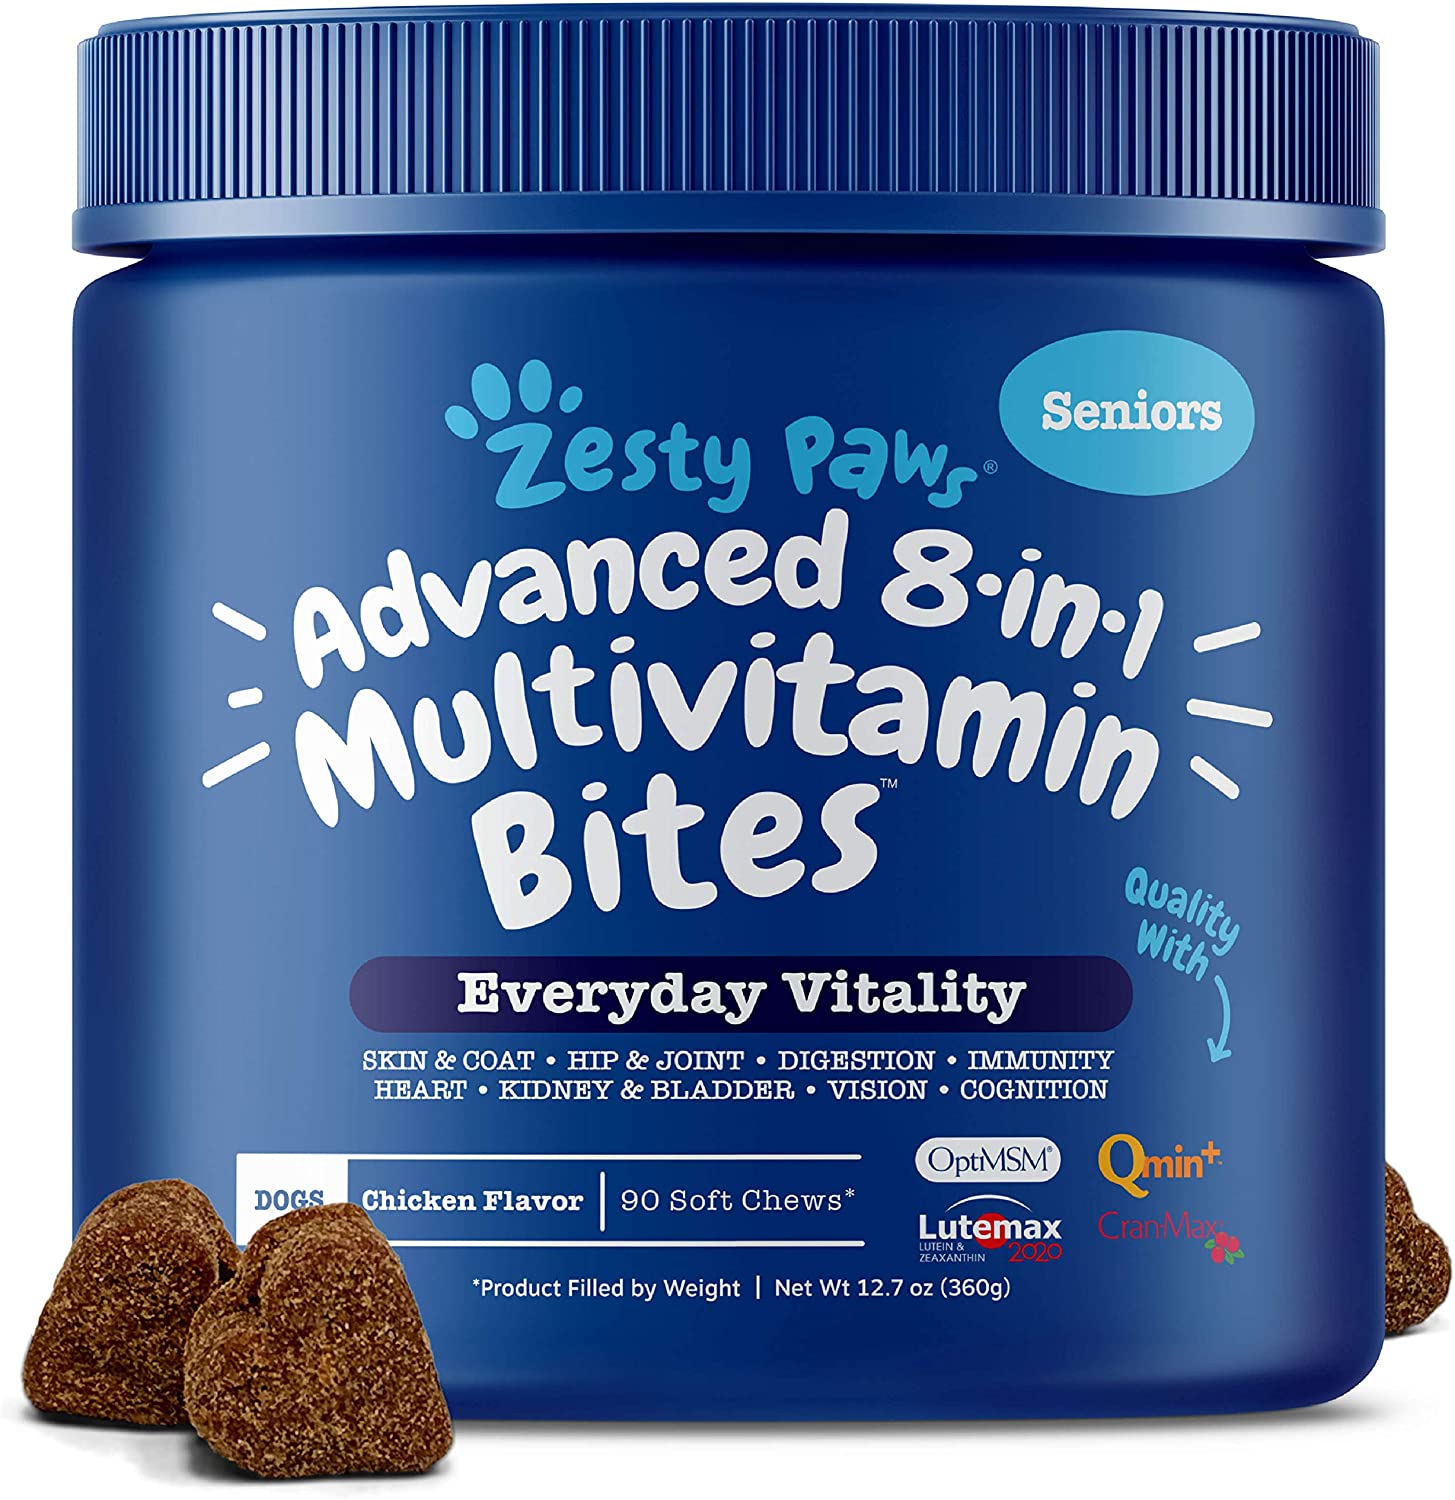 Zesty Paws Senior Advanced Multivitamins For Dogs